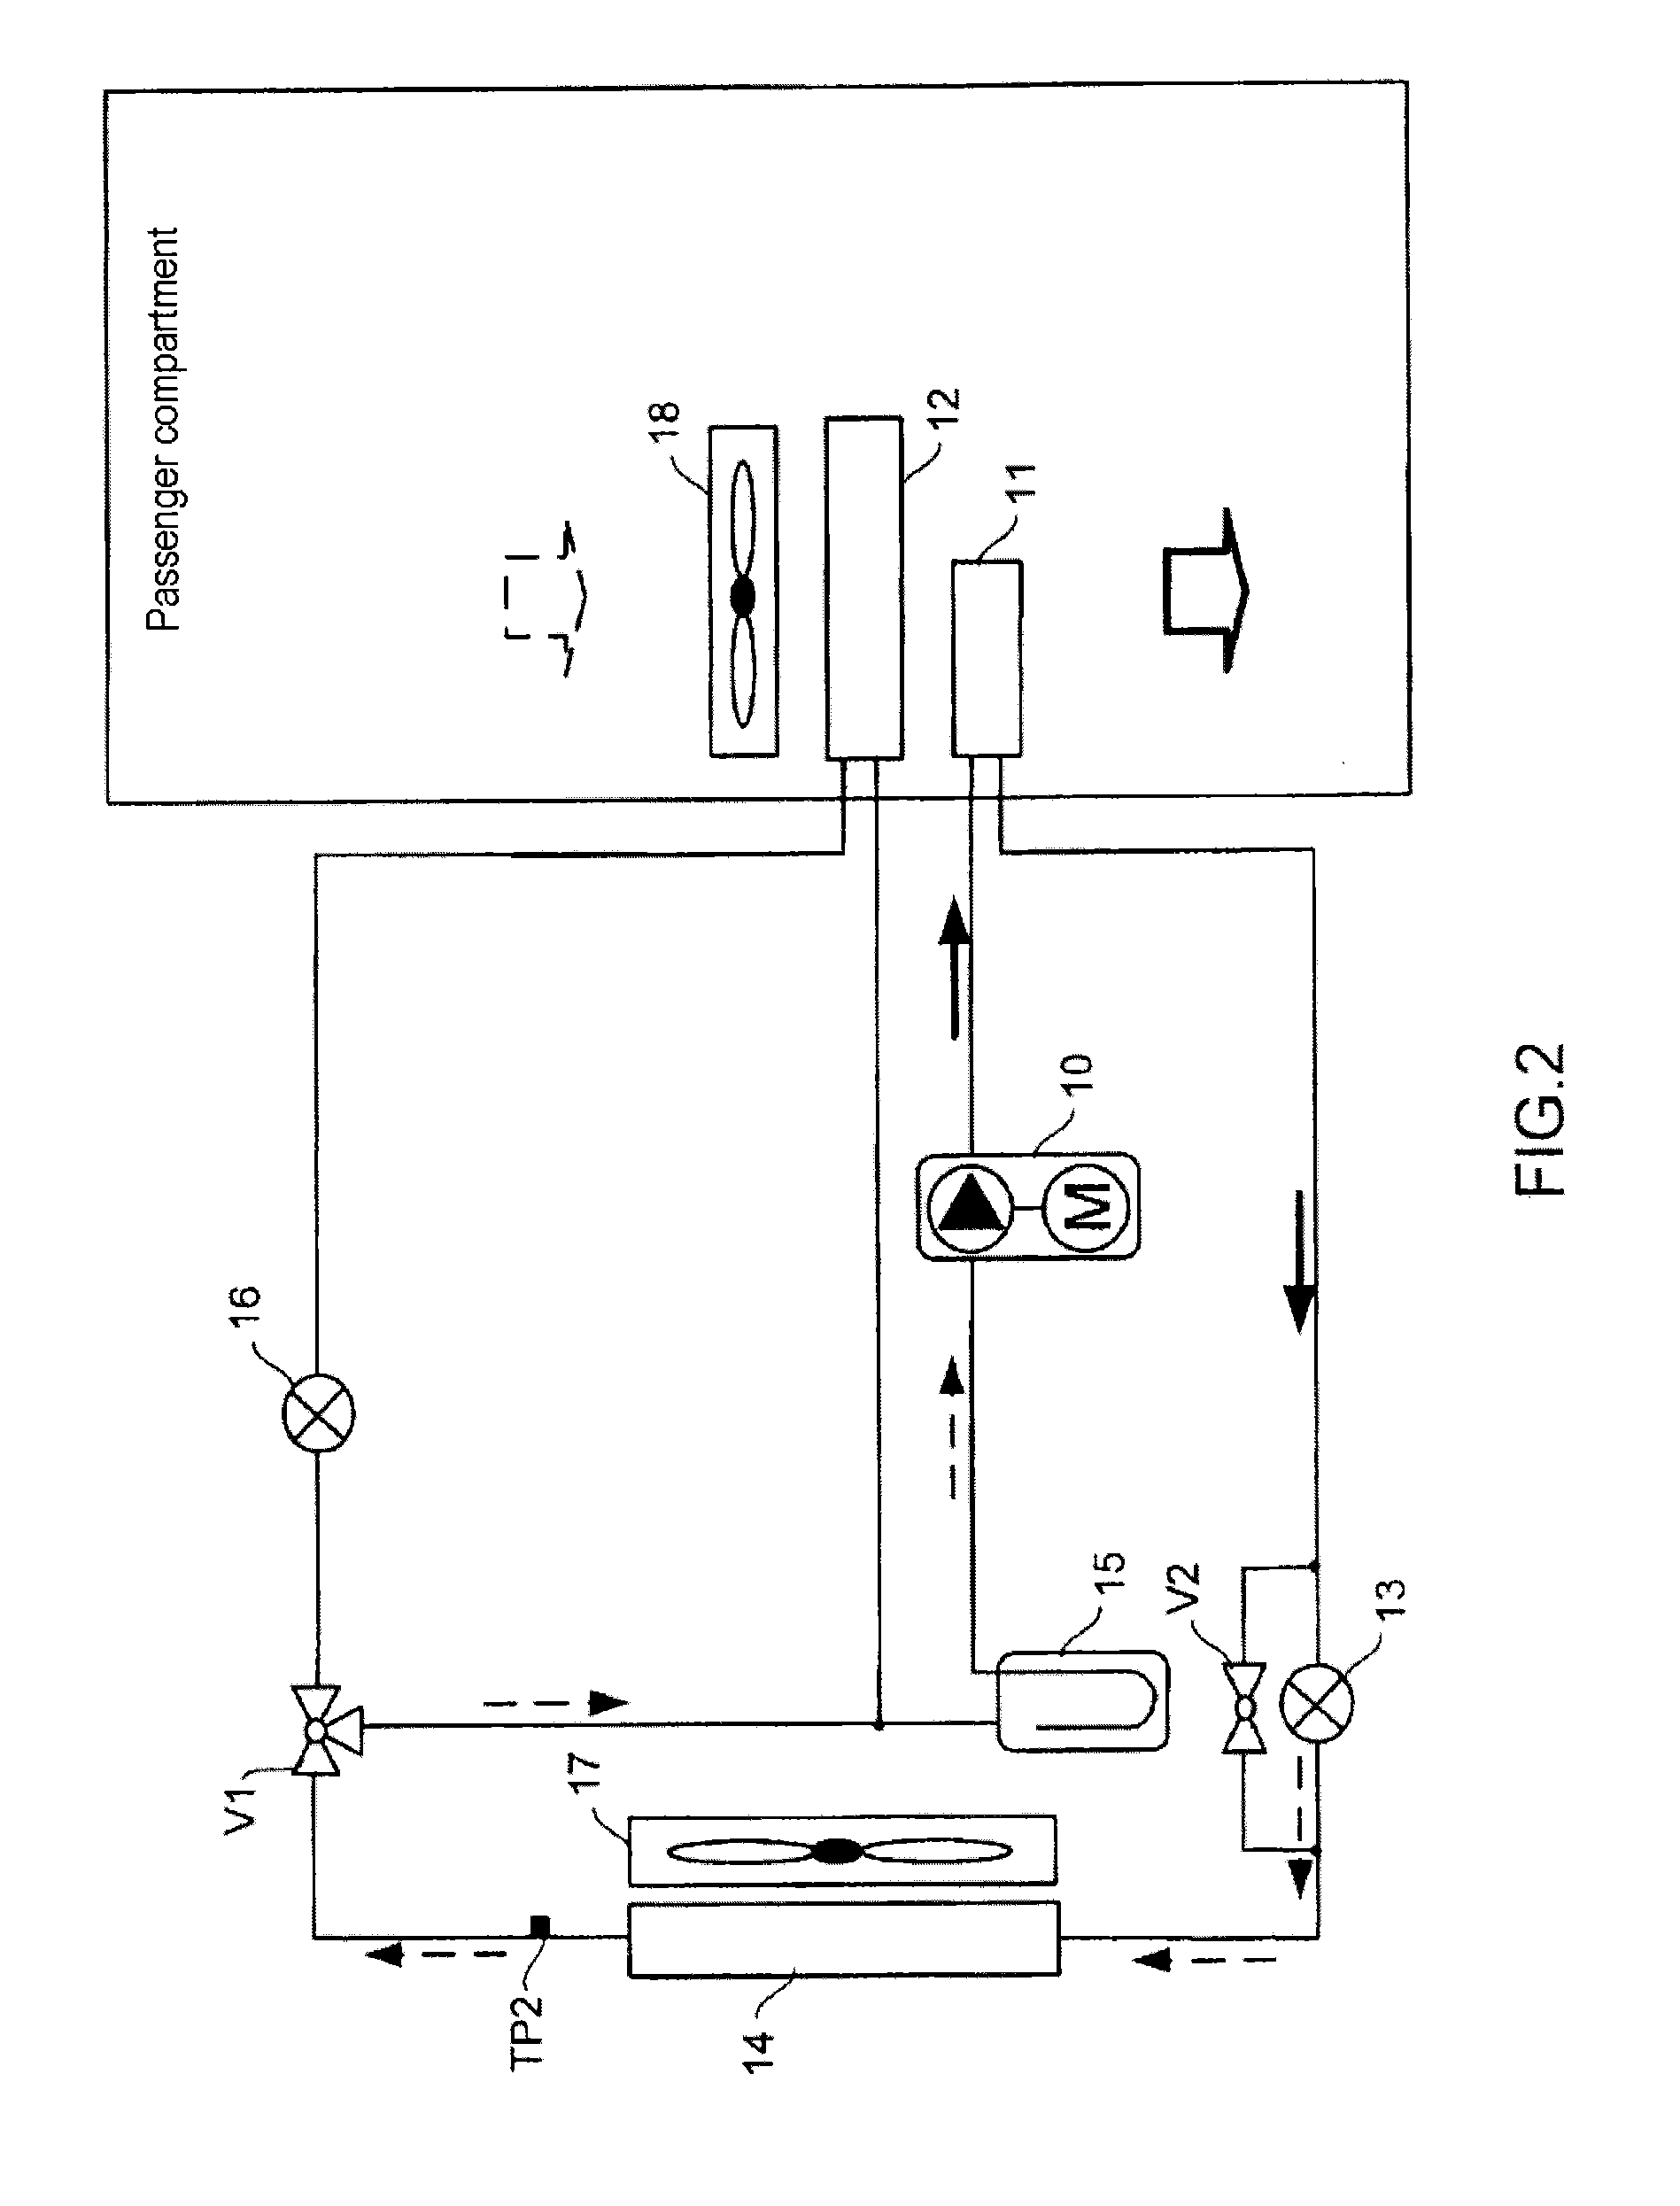 Automatic control method used for defrosting a heat pump for a vehicle